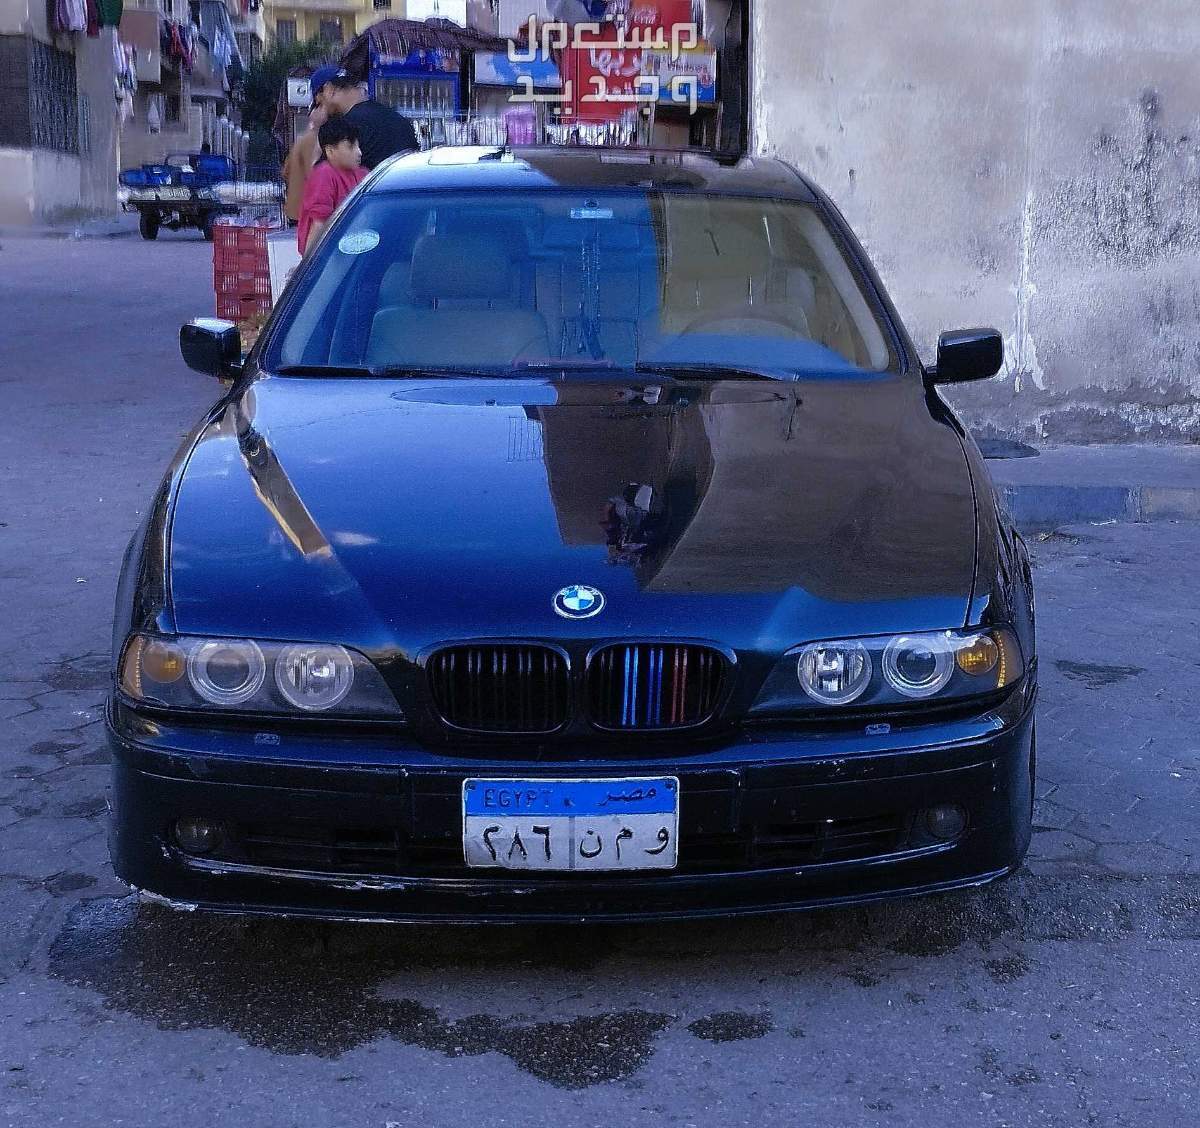 BMW 1998 in Al-Obour at a price of 530 thousands EGP